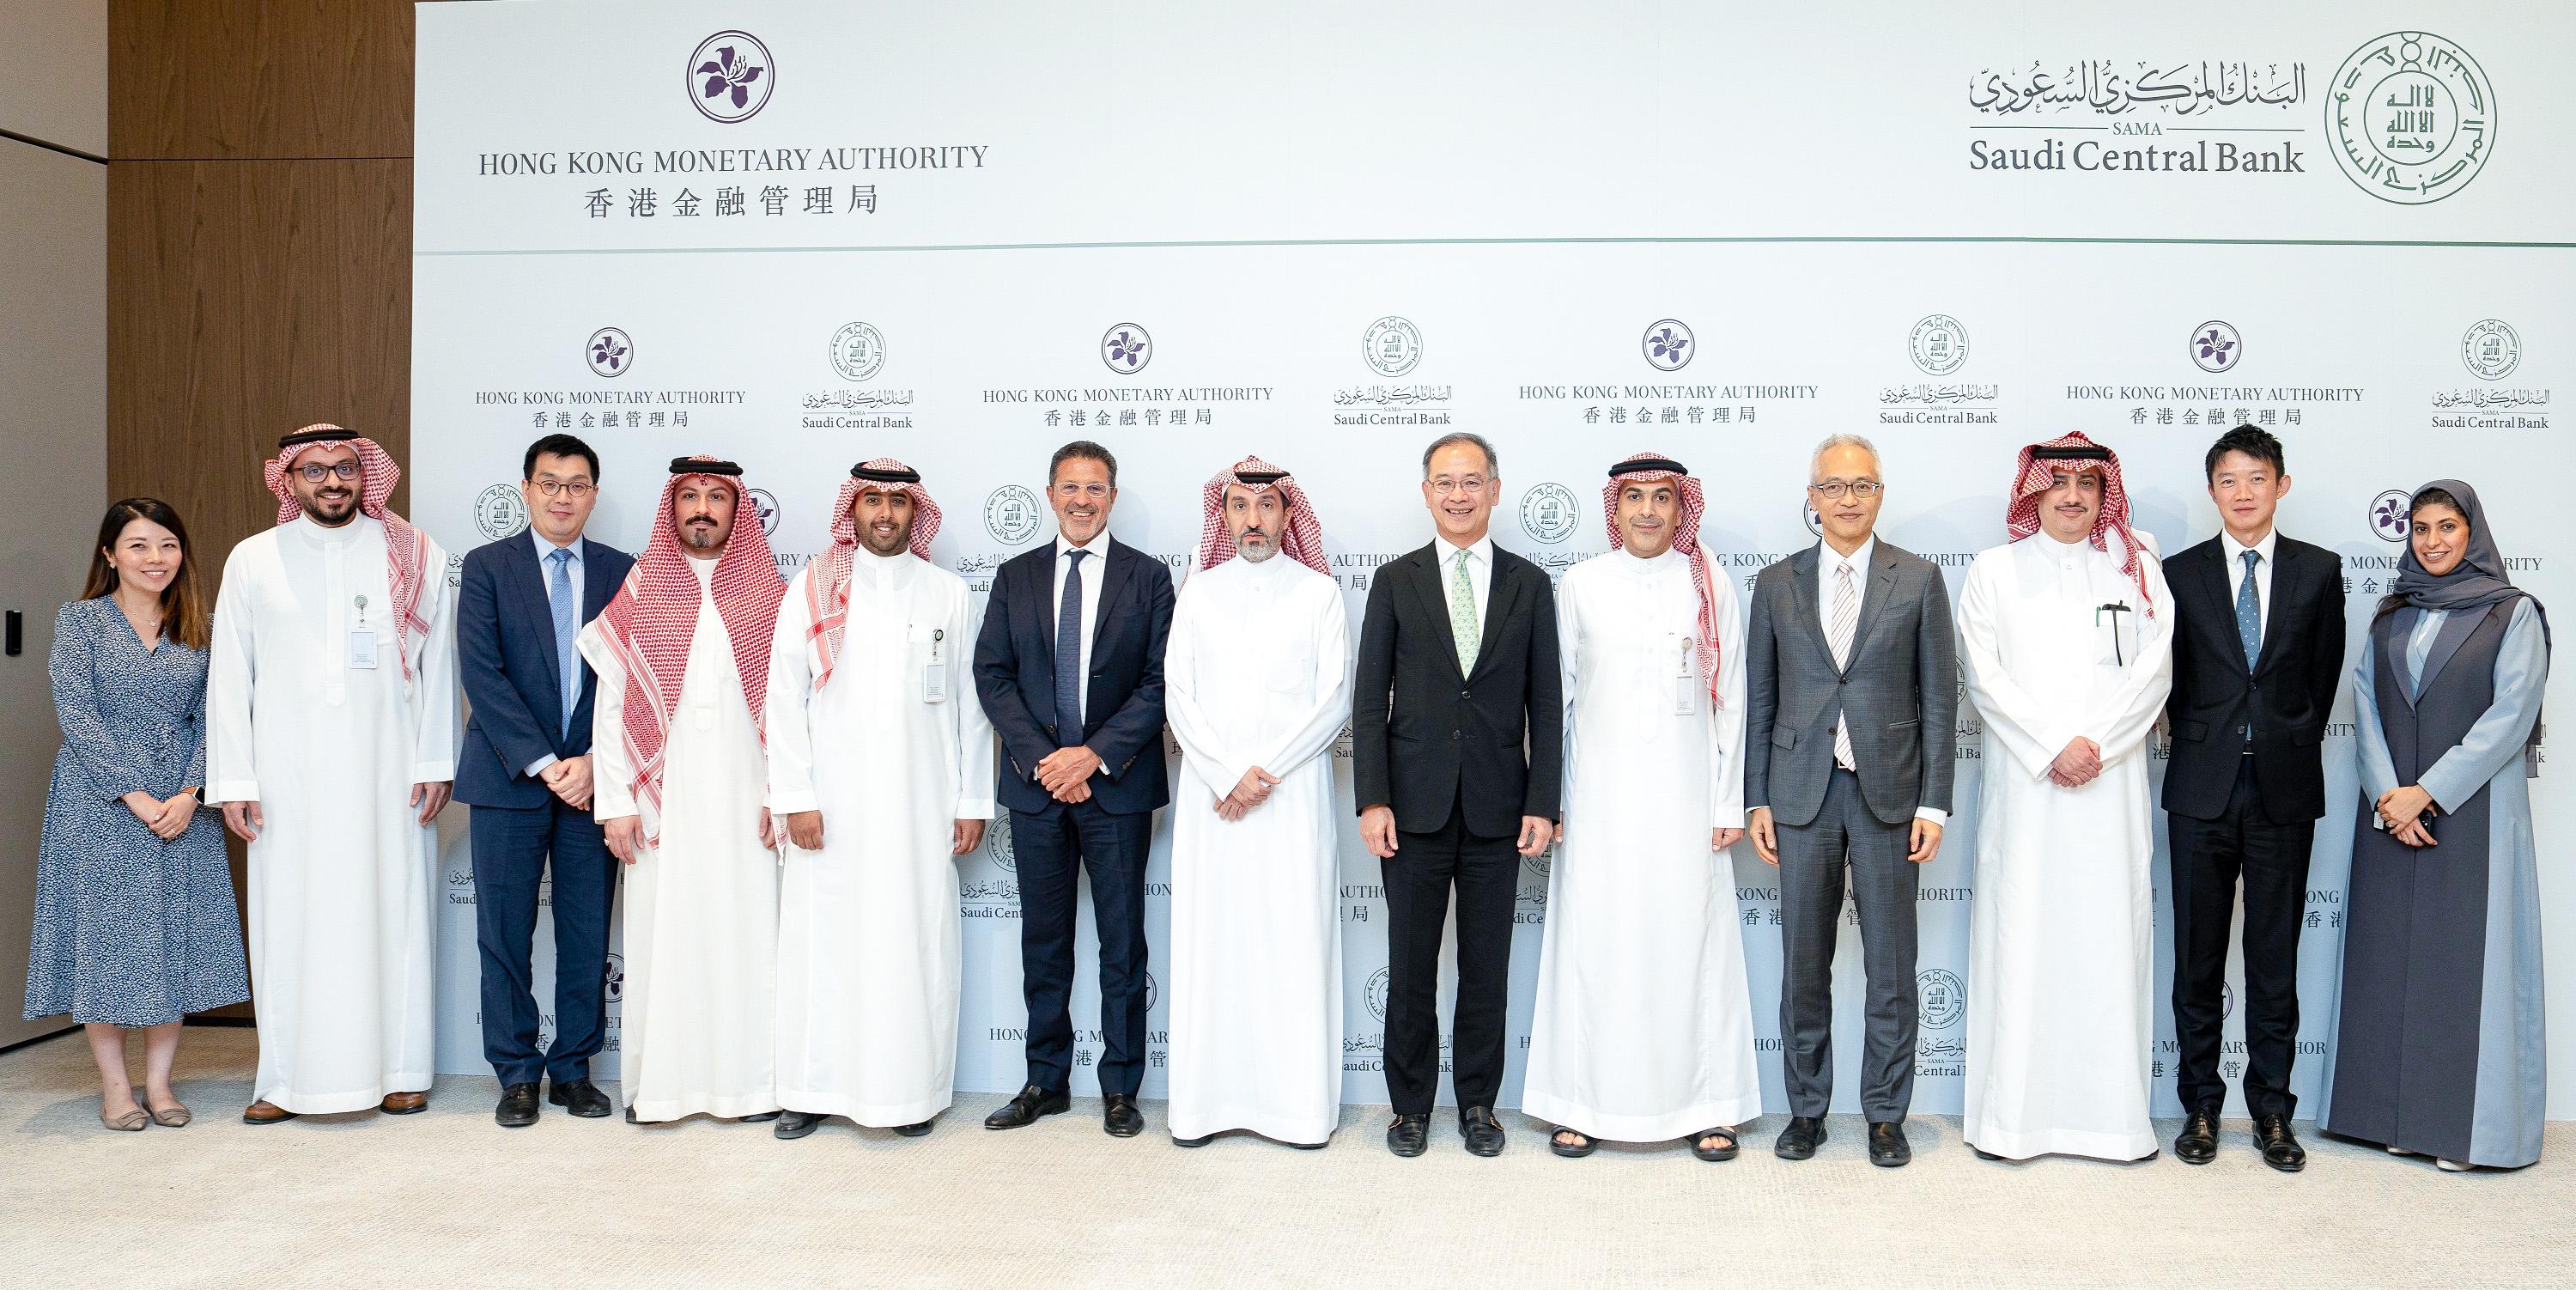 The Chief Executive of the Hong Kong Monetary Authority (HKMA), Mr Eddie Yue (sixth right) and the Governor of the Saudi Central Bank (SAMA), Mr Ayman Alsayari (fifth right) conducted a bilateral meeting on July 26 (Riyadh time) with senior managements from the HKMA and the SAMA to enhance collaboration between the financial services sector in the two jurisdictions.